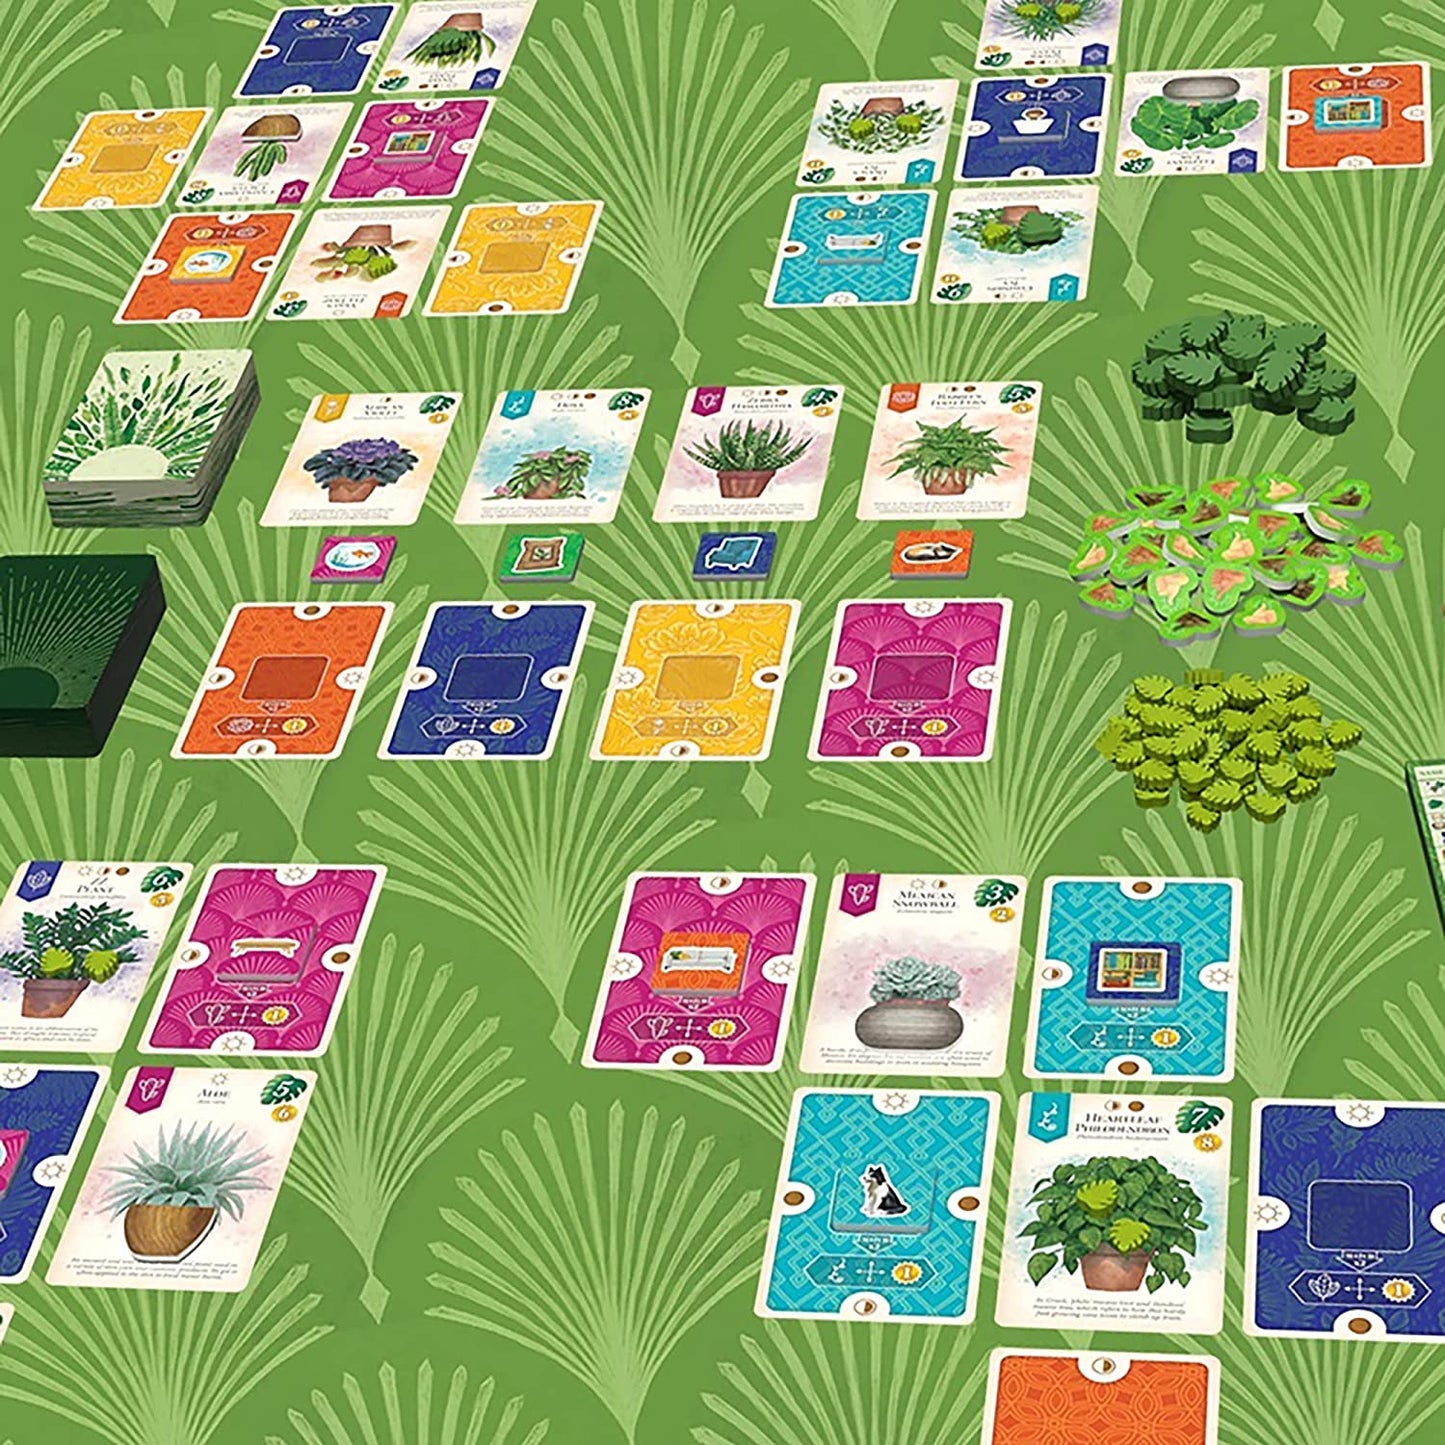 Verdant is a captivating card game for up to five players. AEG. Sold by Board Hoarders. beauitful artwork